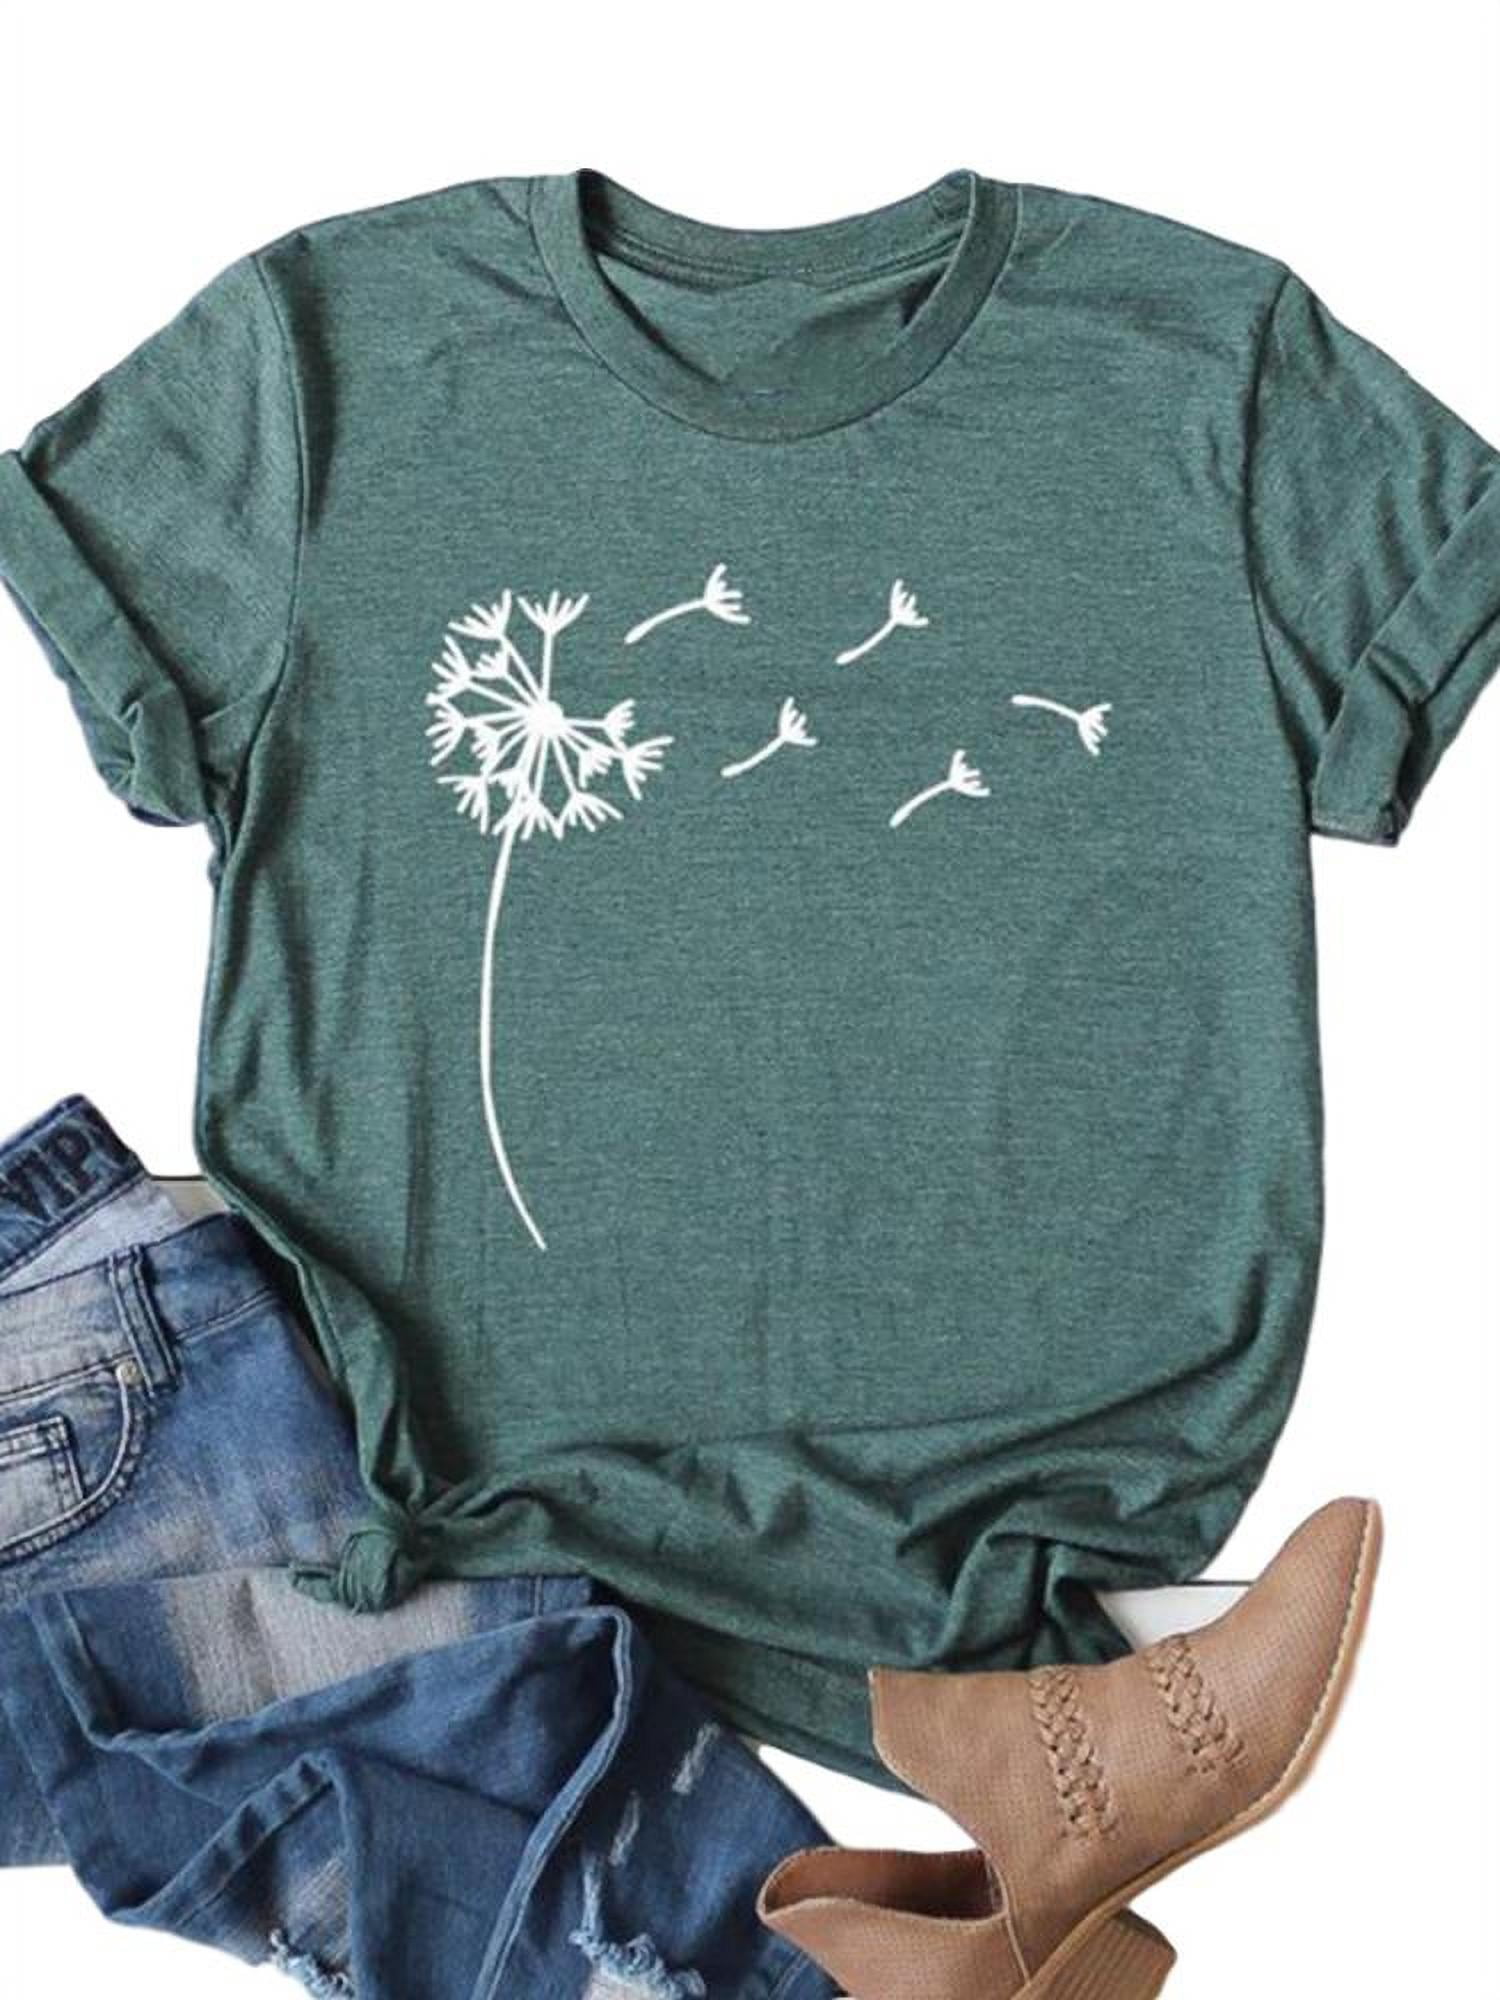 2021 Fashion Womens Funny Graphic T-Shirts Casual Dandelion Printing O-Neck Blouse Tops POTO Womens Short Sleeve Tops